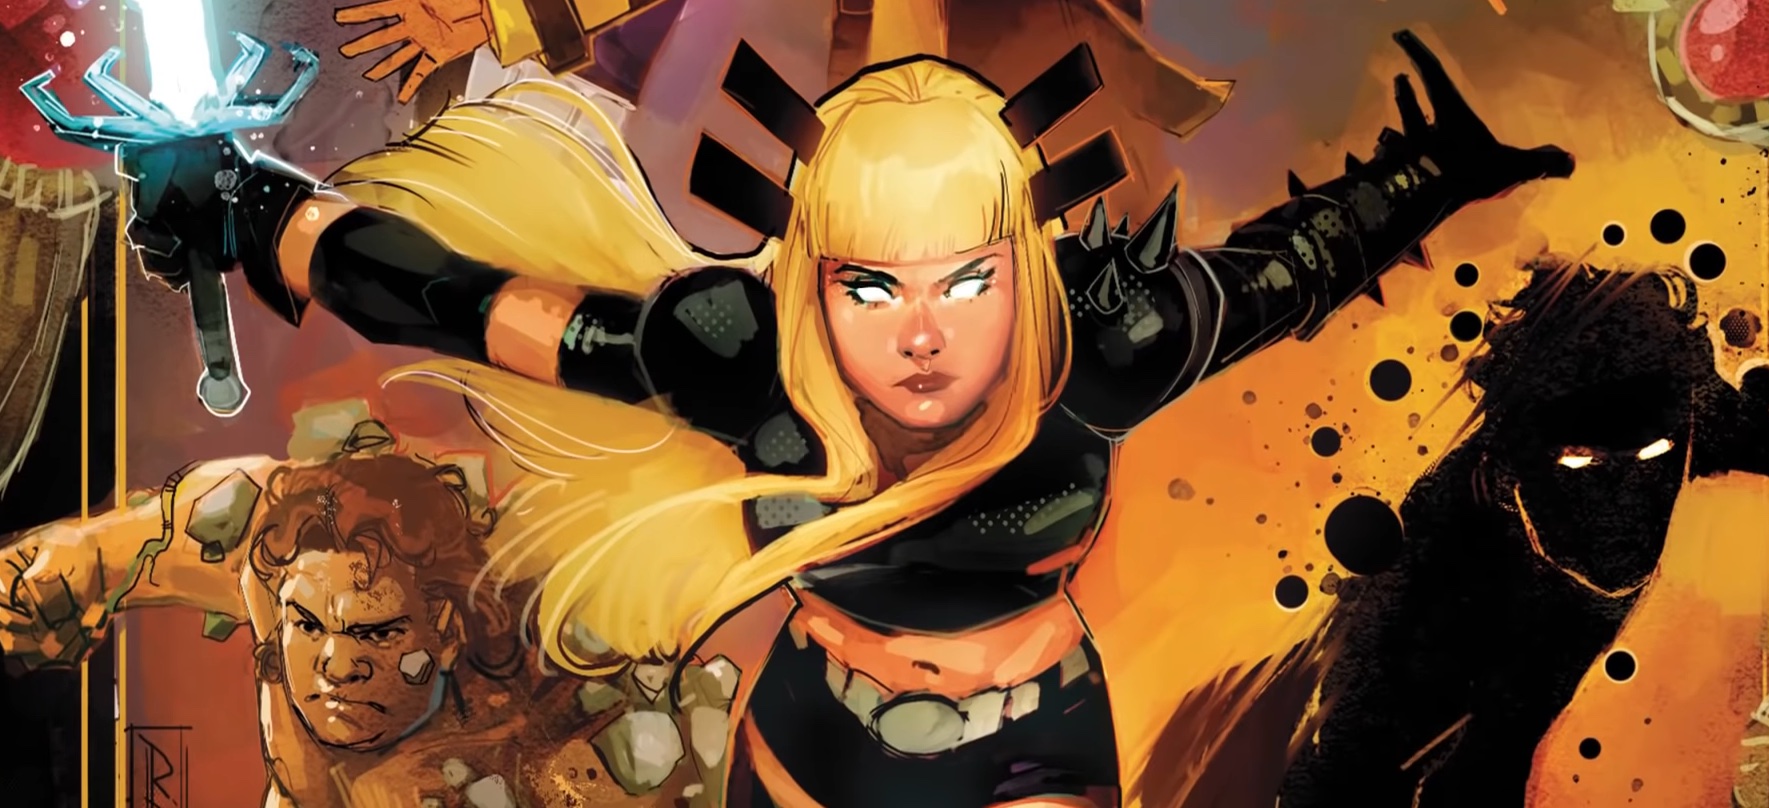 The New Mutants” Latest Trailer Released! Queer Representation and